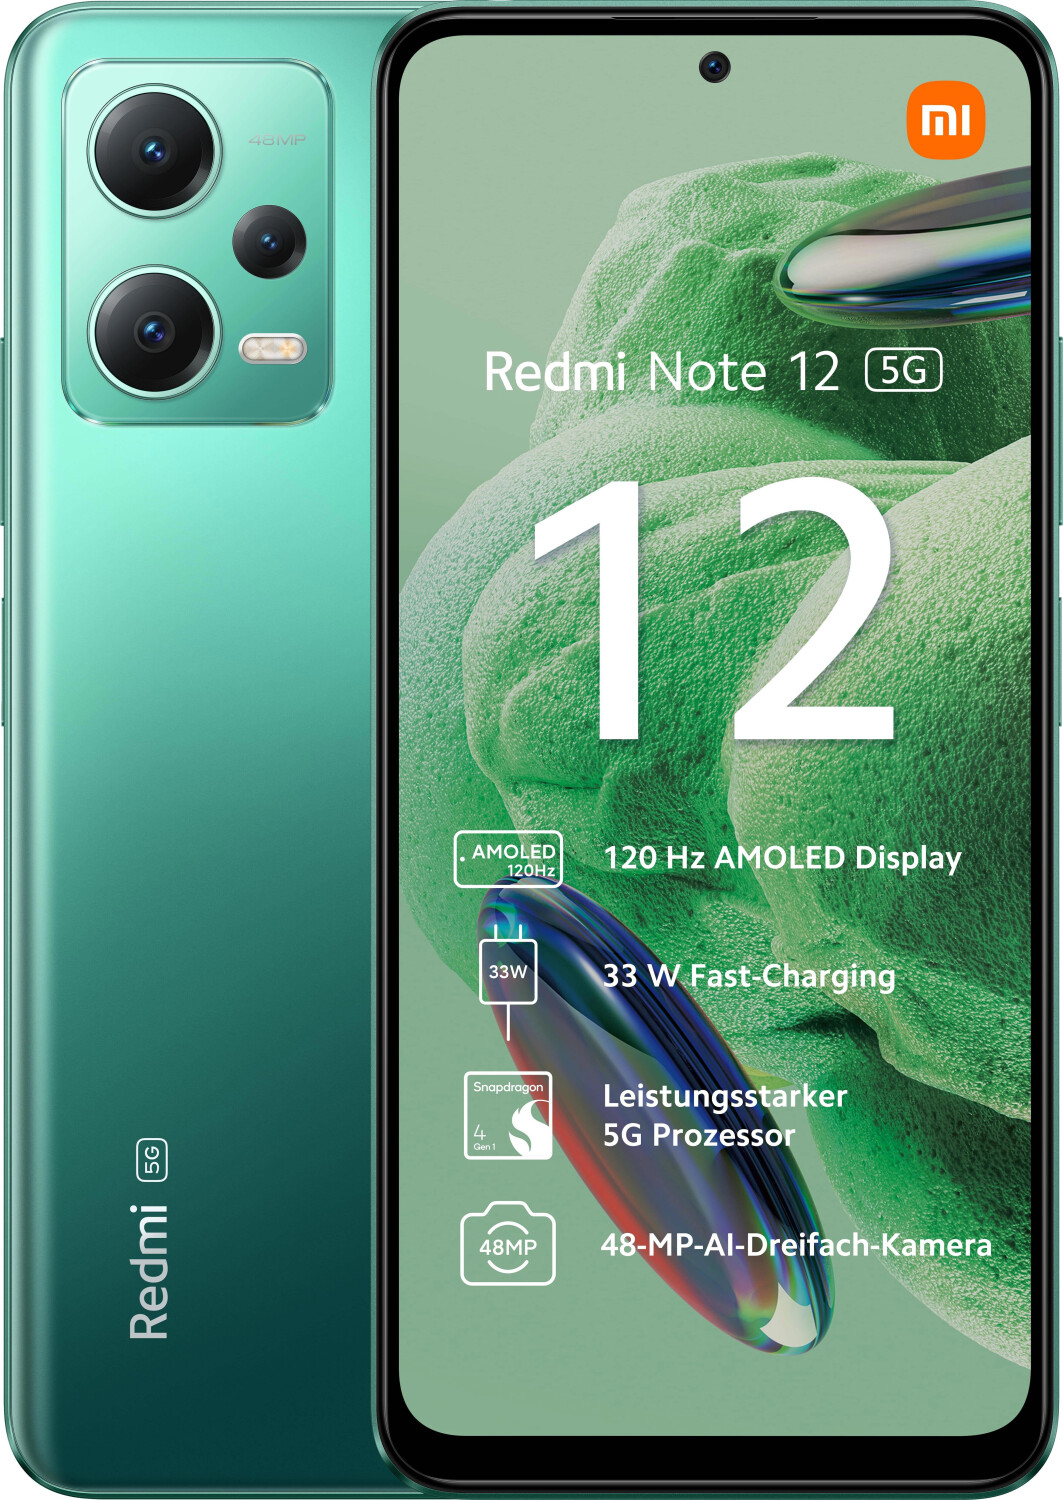 Buy Xiaomi Redmi Note 12 from £150.49 (Today) – Best Deals on